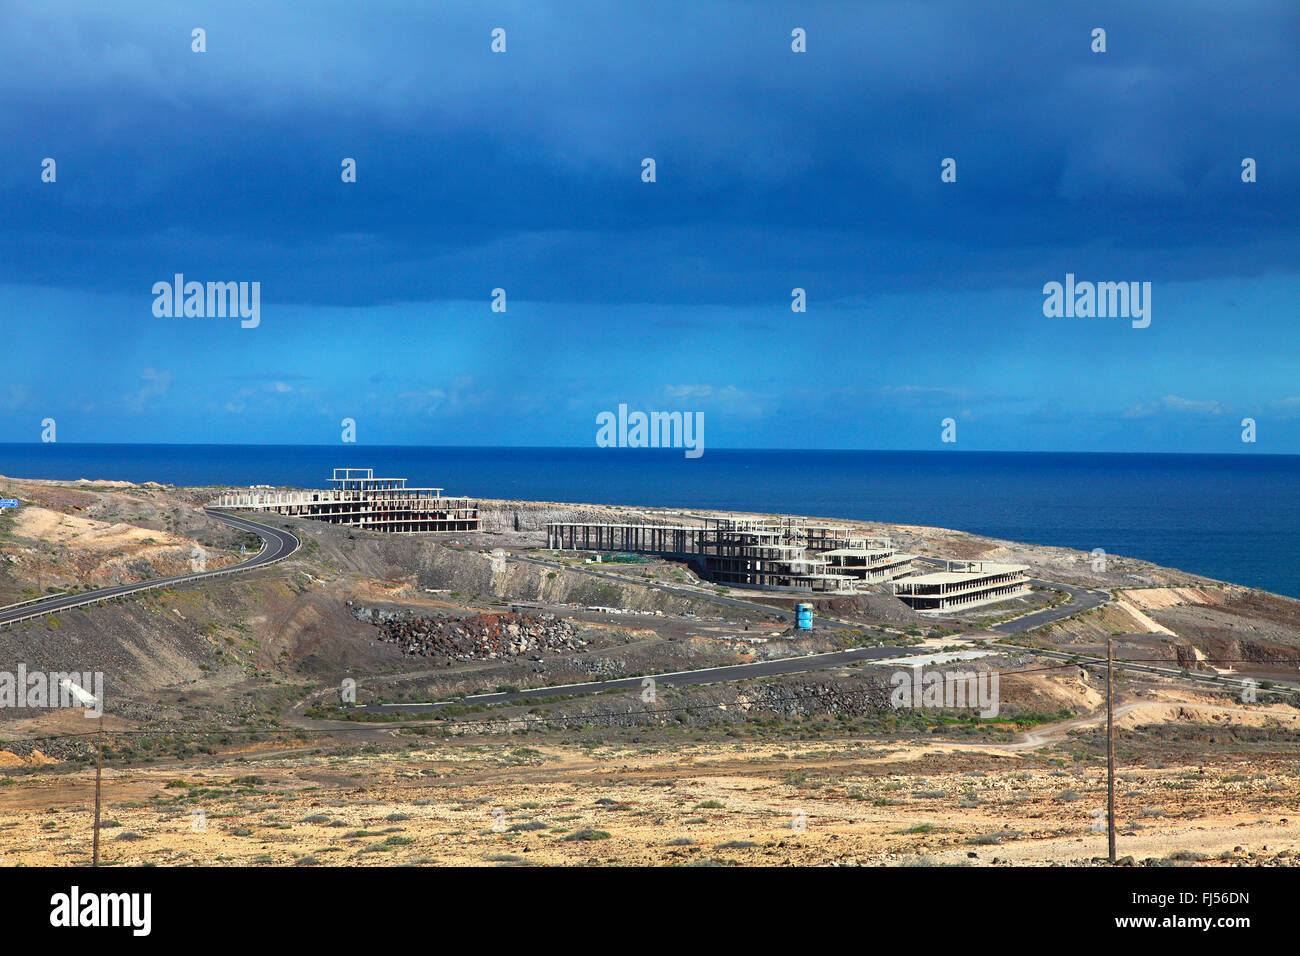 cancelled carcass of a hotel at the coast, Canary Islands, Fuerteventura Stock Photo